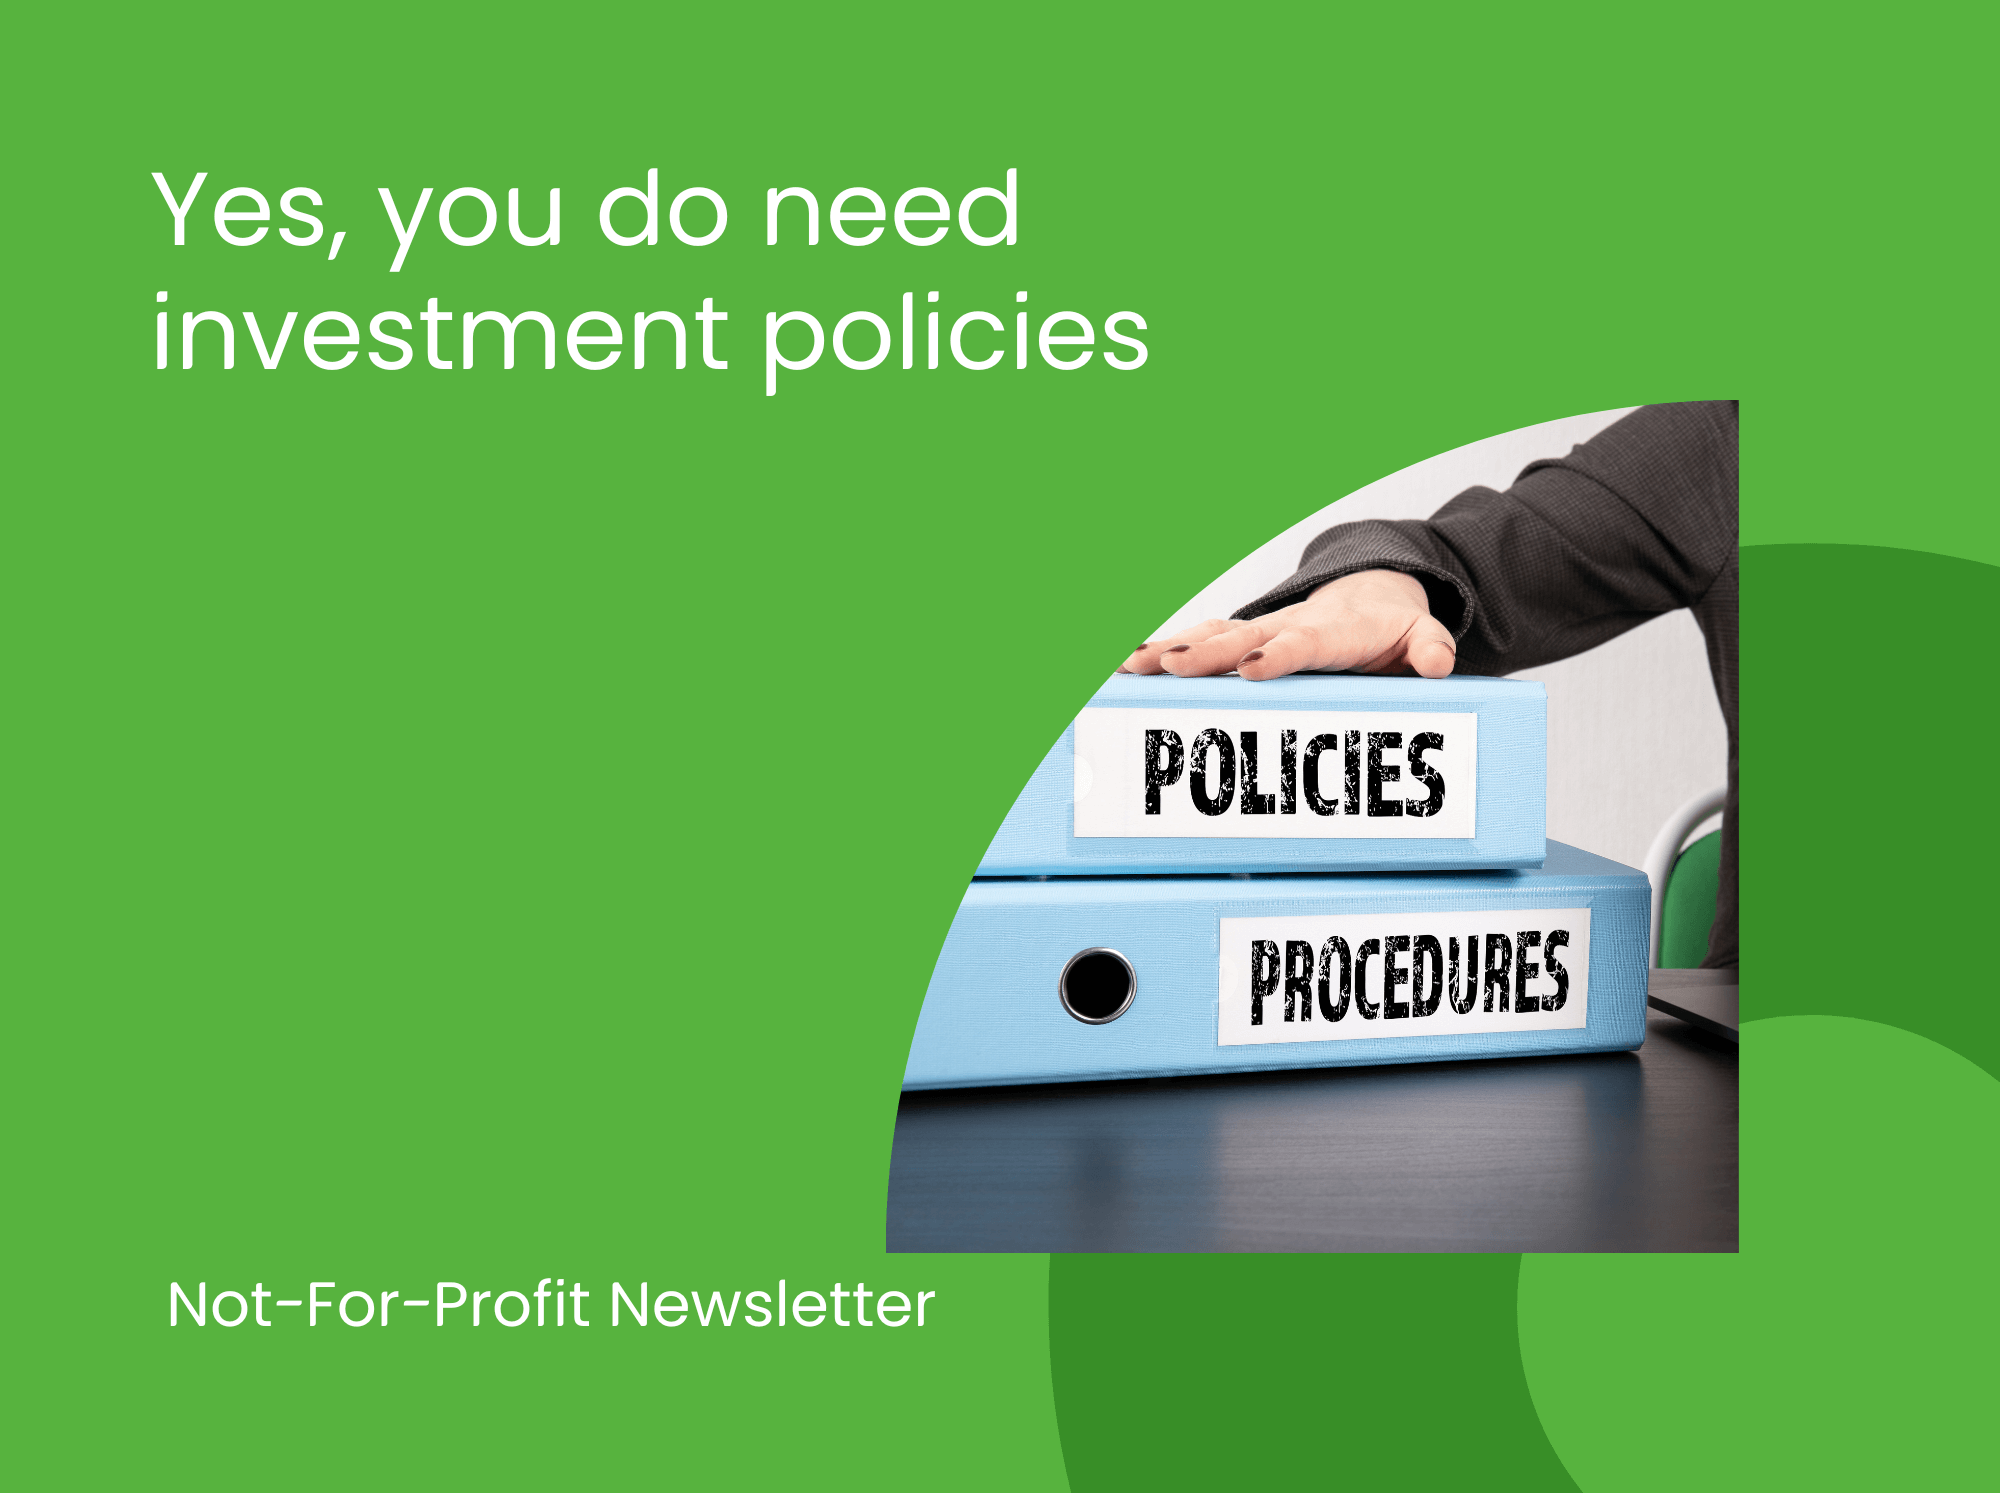 Yes, you do need investment policies